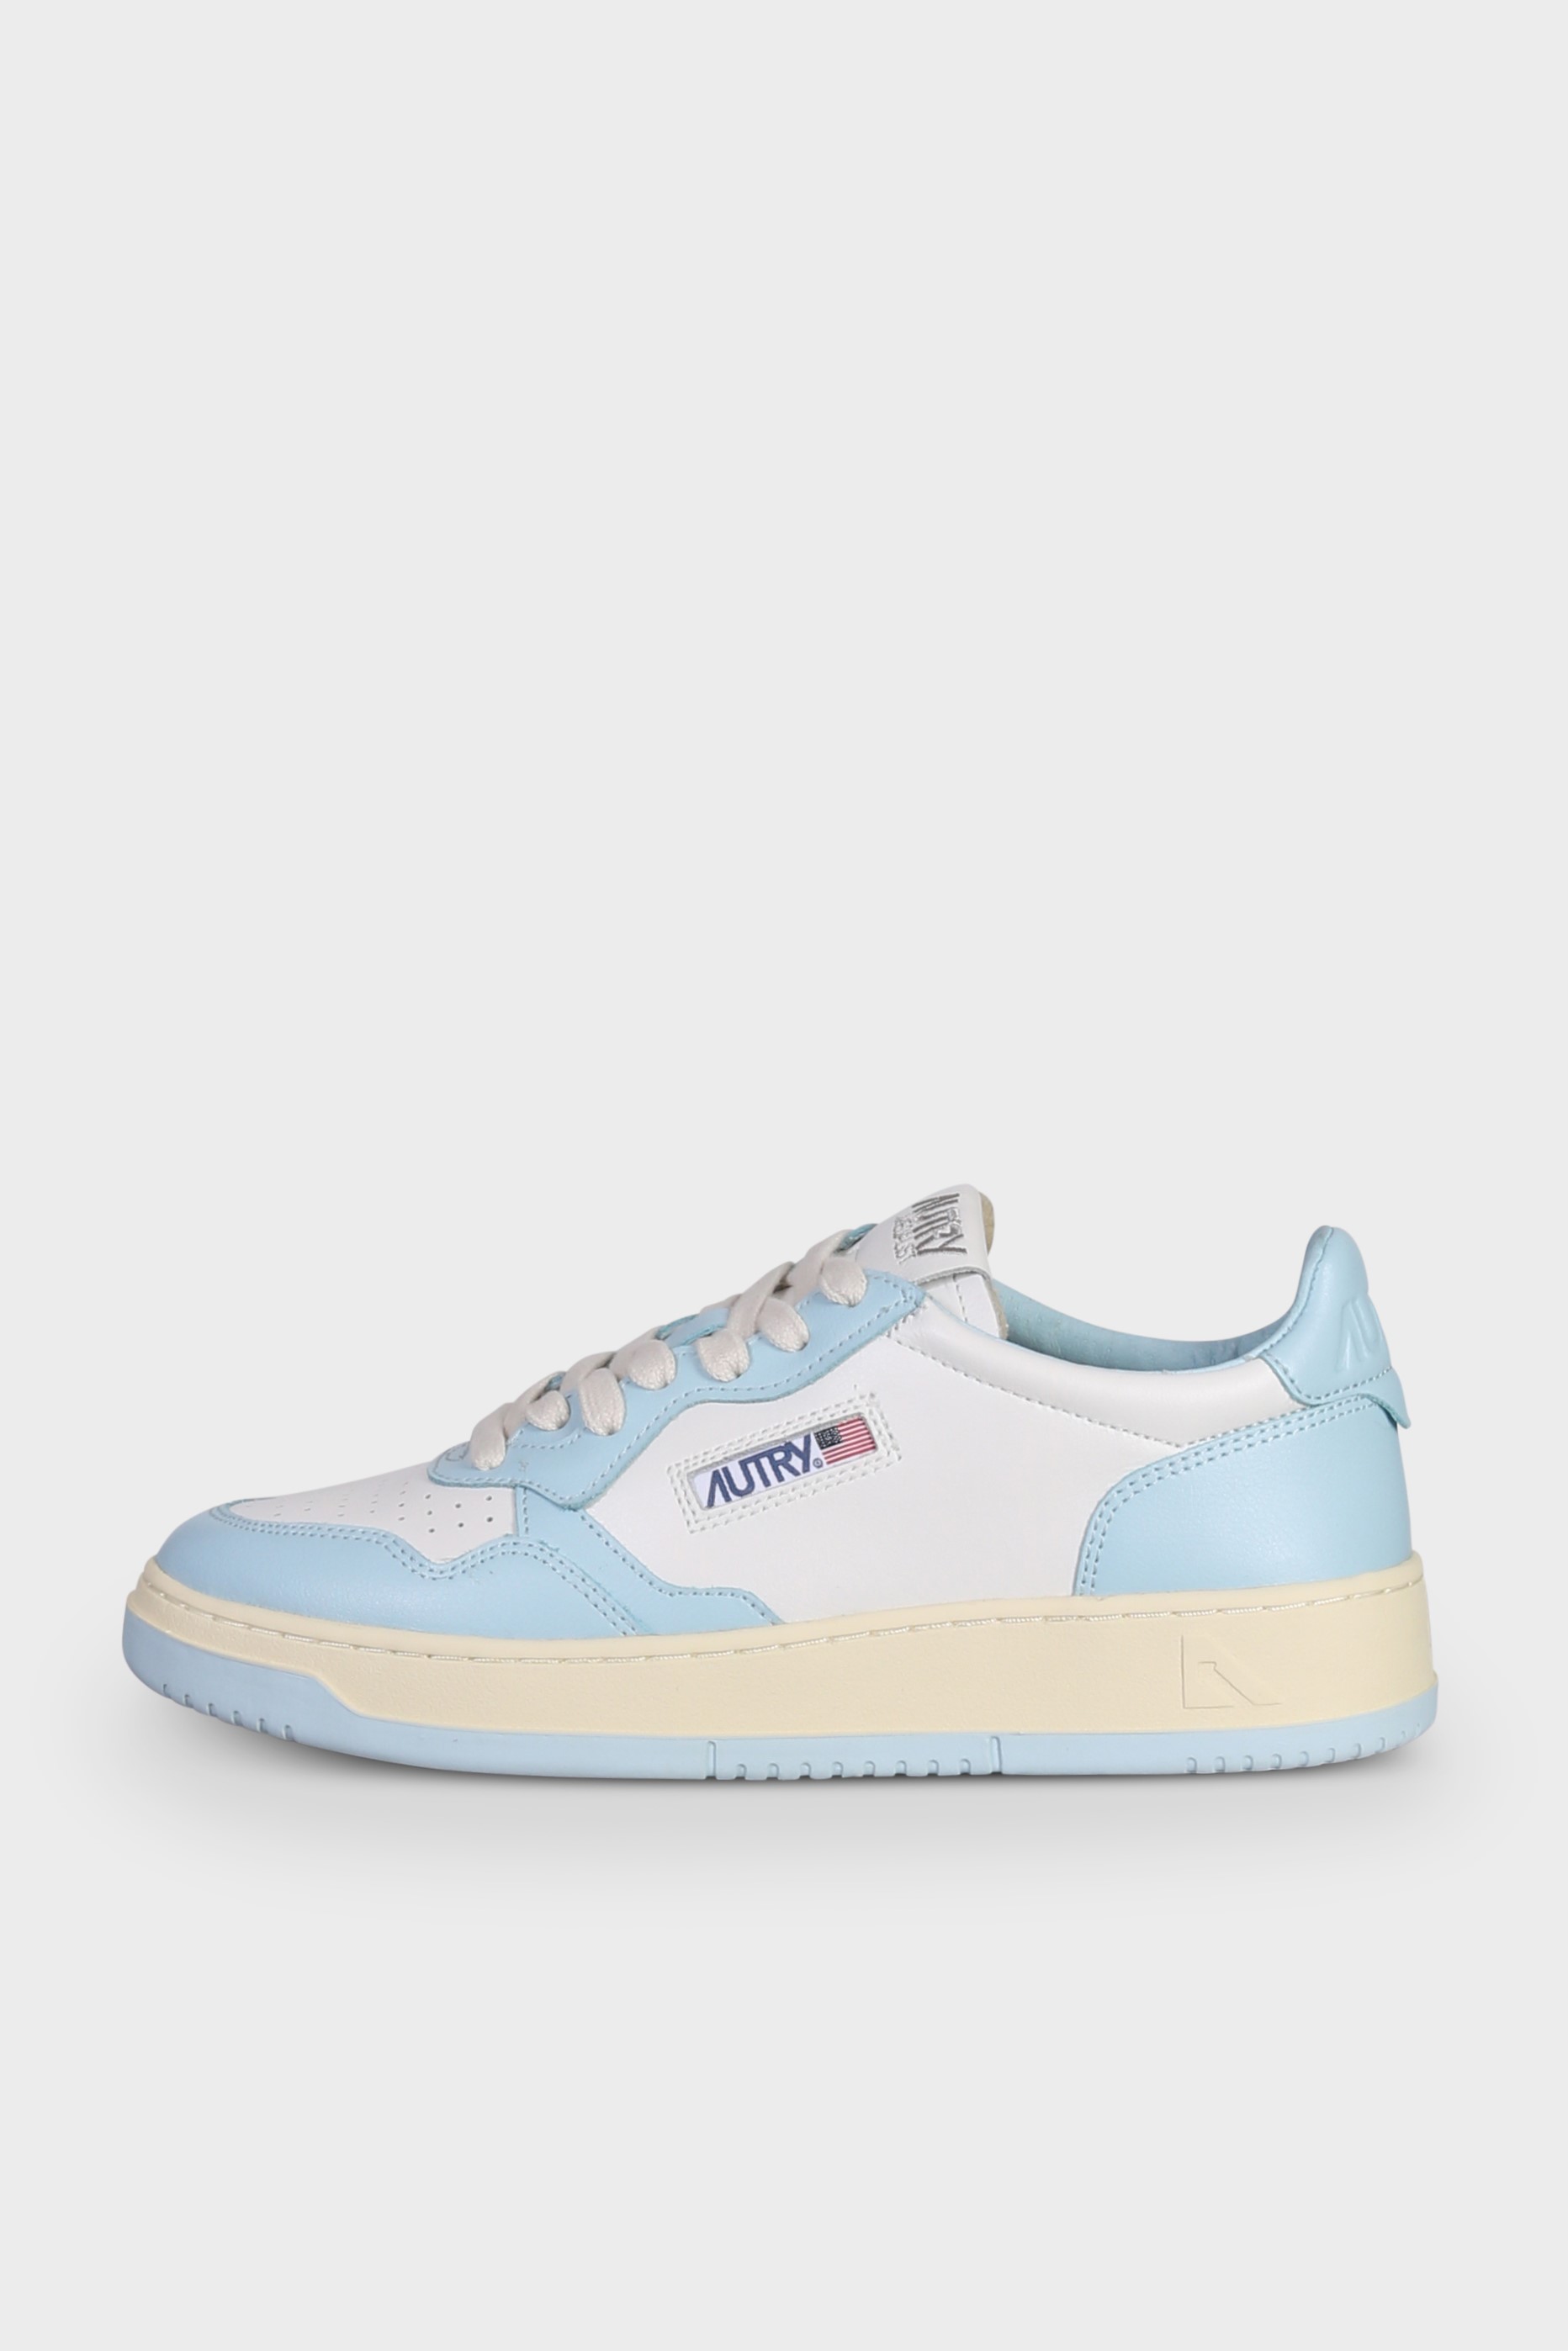 AUTRY ACTION SHOES Low Sneaker White/Stream Blue 39